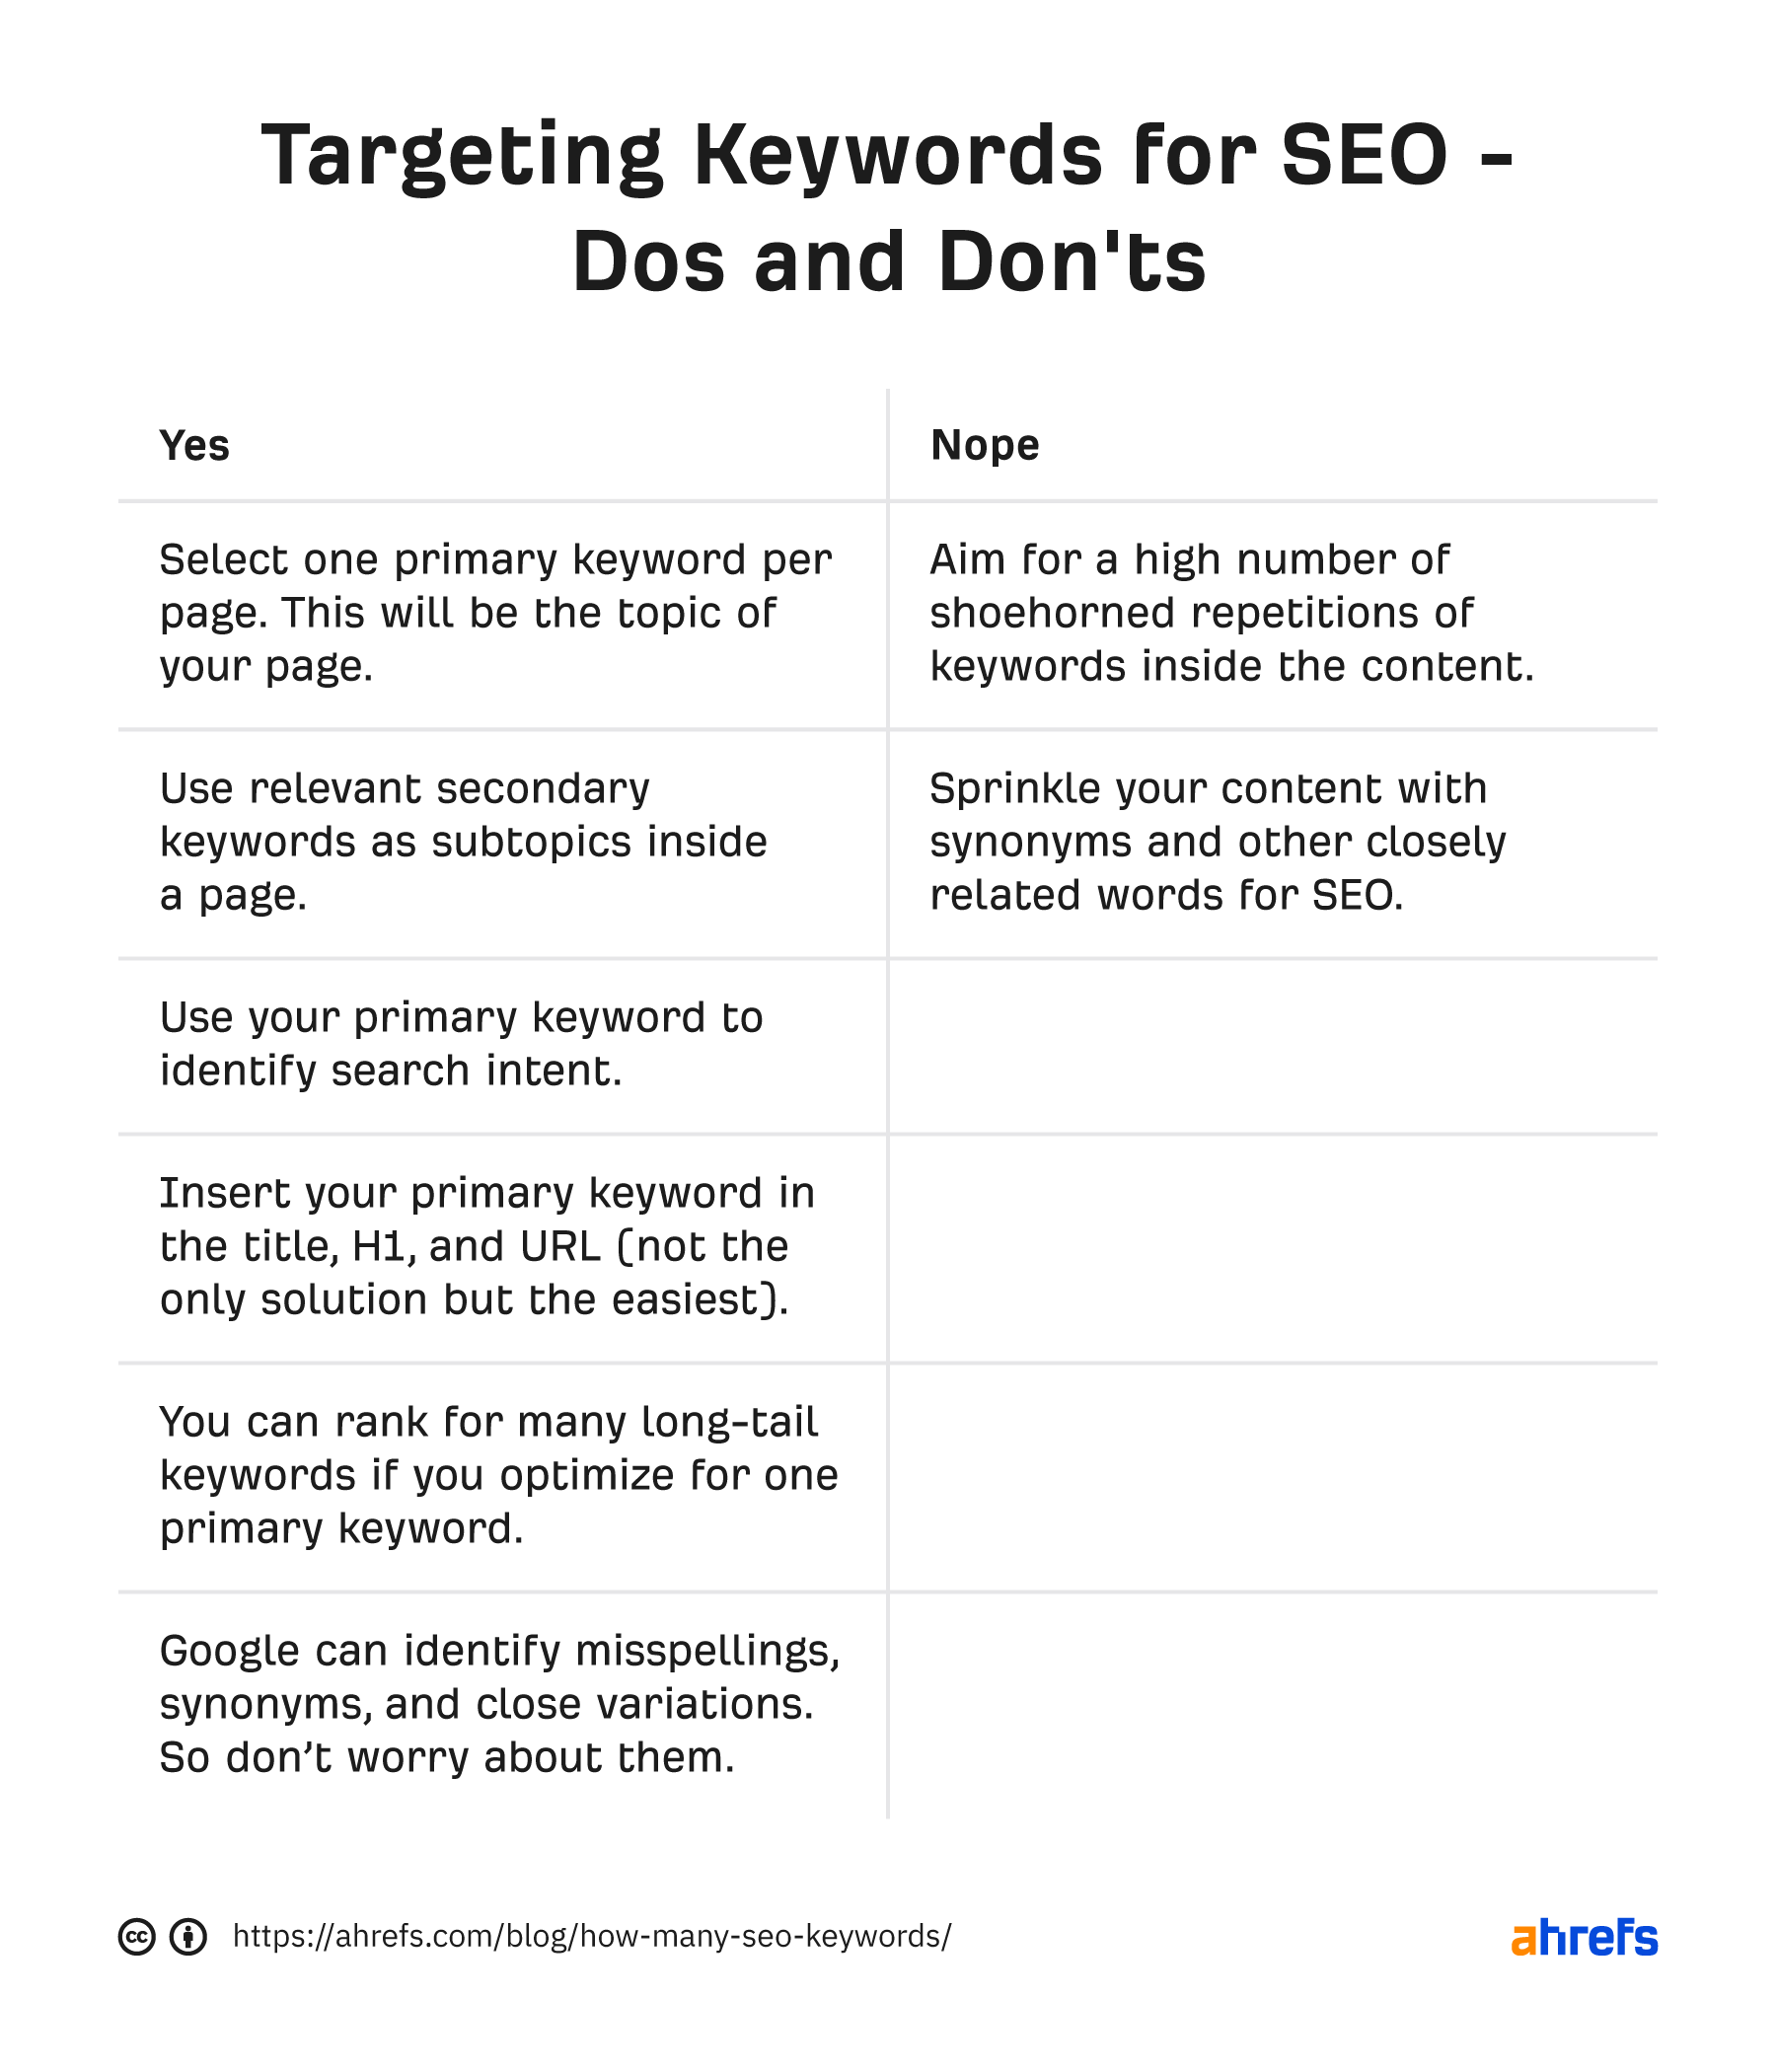 Table of dos and don 'ts when targeting keywords for SEO